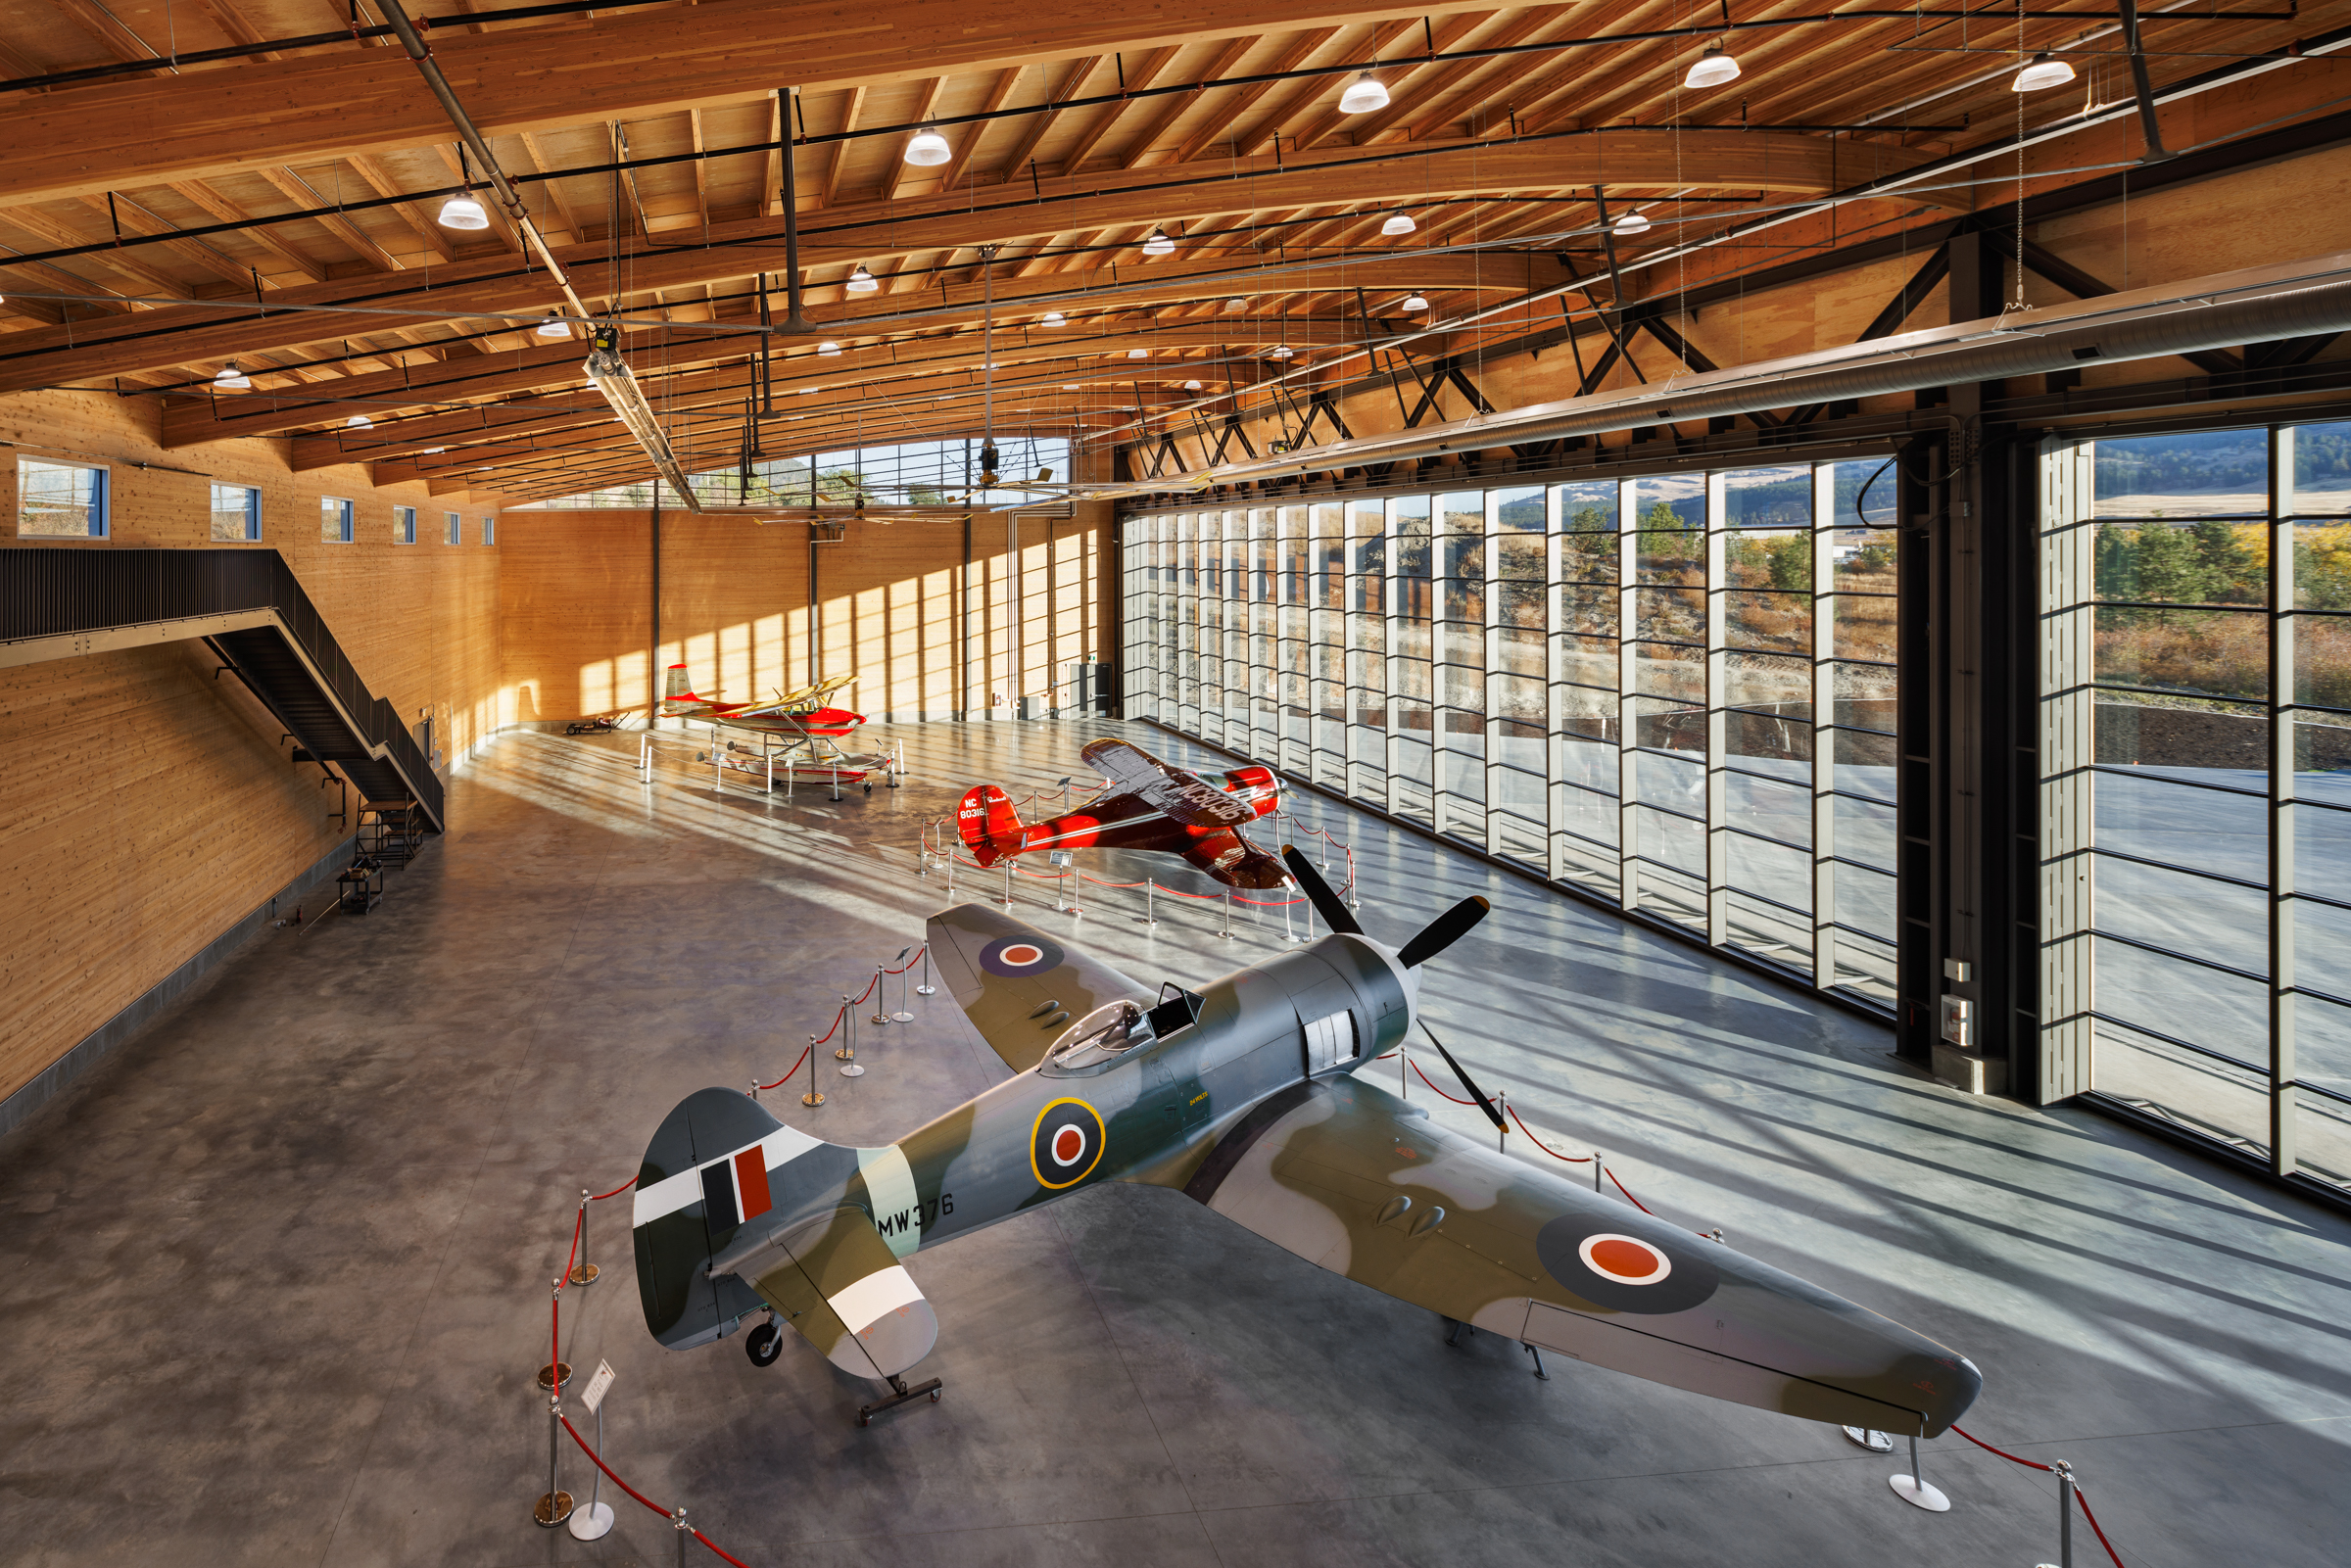 Interior of aerospace museum, built to look like an aircraft hanger